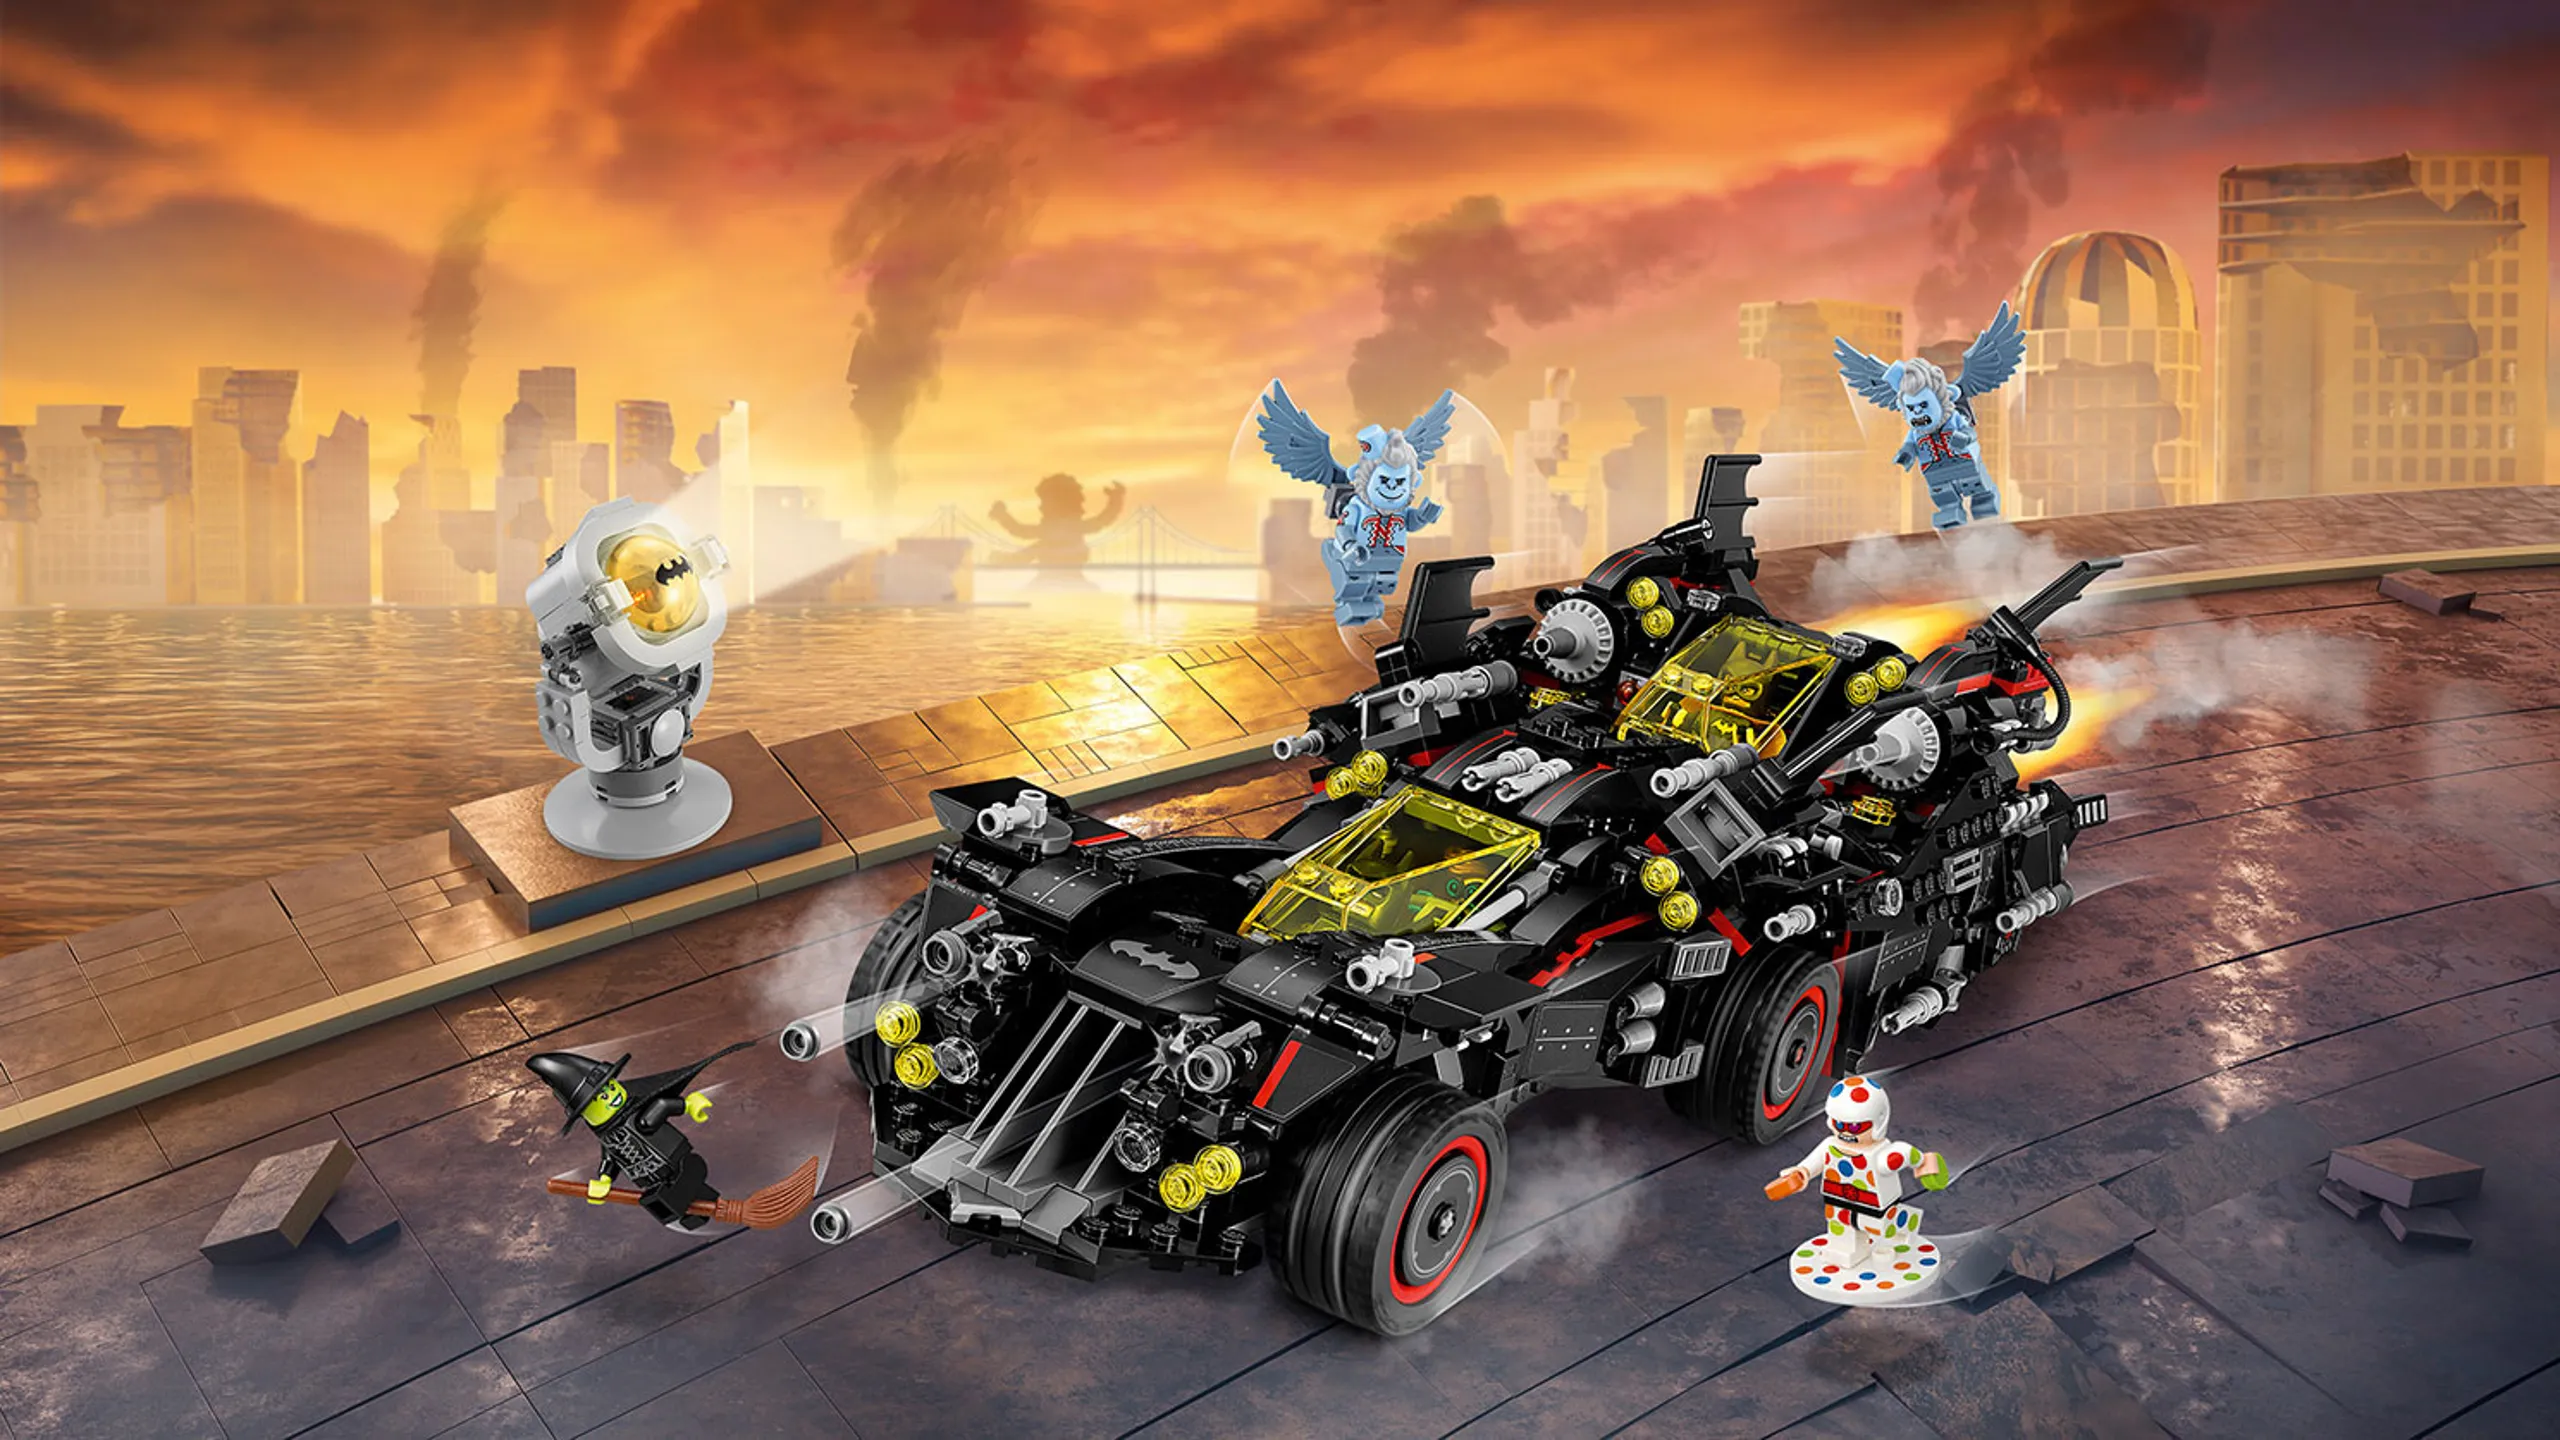 LEGO Batman Movie The Ultimate Batmobile - 70917 - With the 4 in 1 ultimate Batmobile Batman and his team chases the Wicked Witch of the West and Polka-Dot Man through Gotham City. 